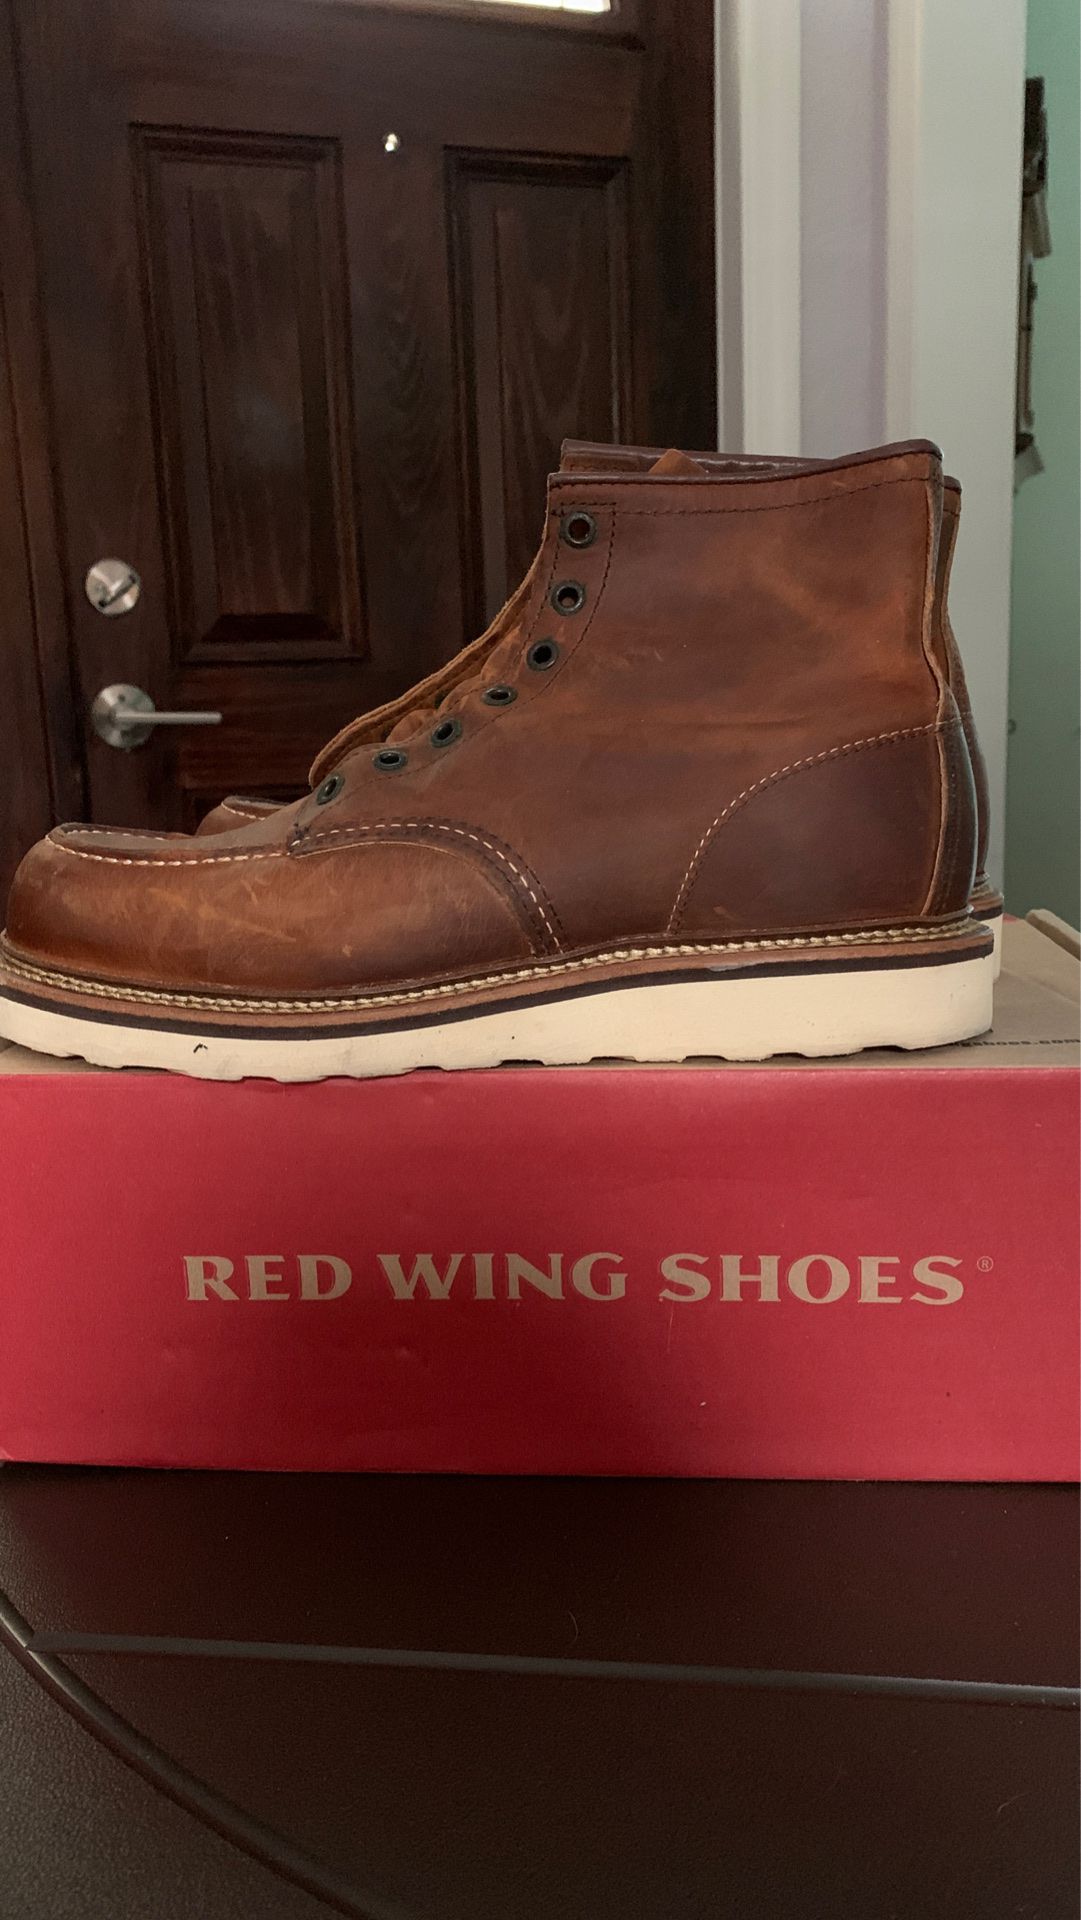 Red Wing Shoes work boot size 9 1/2 D